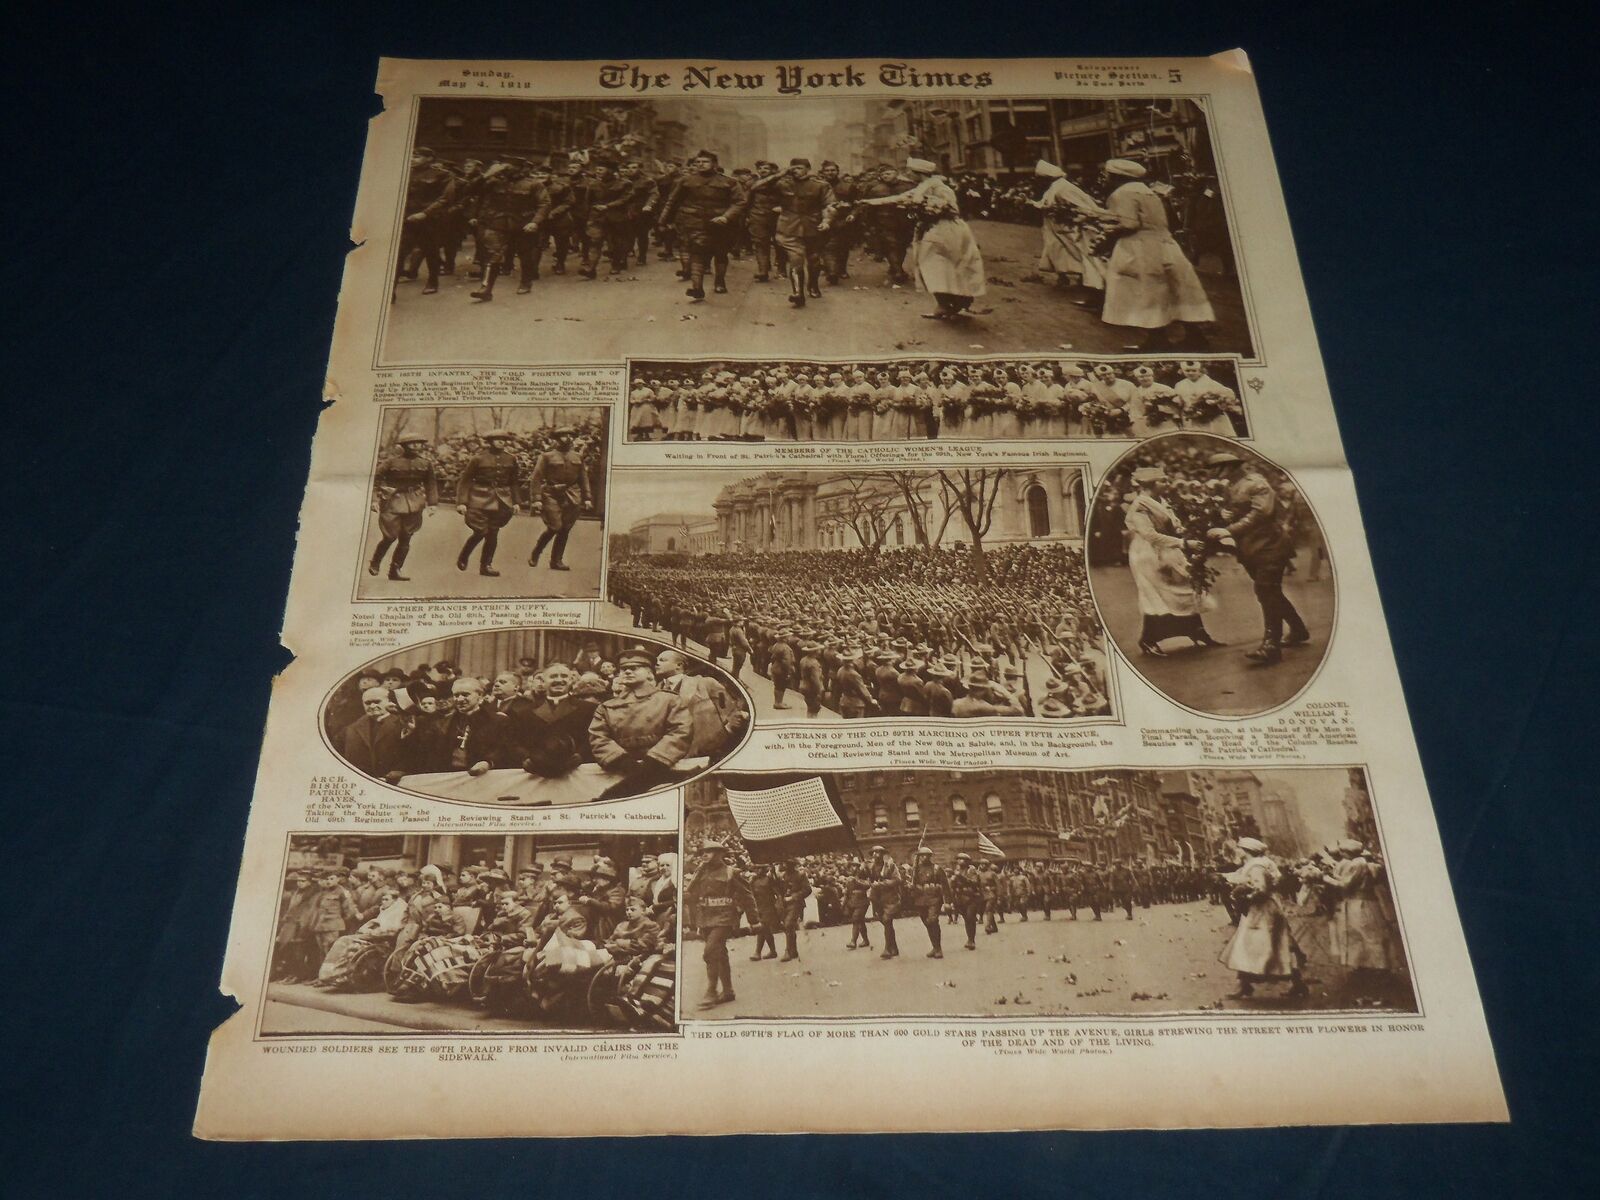 1919 MAY 4 NEW YORK TIMES PICTURE SECTION NO. 5 & 6 - COCA COLA AD - NT 8839